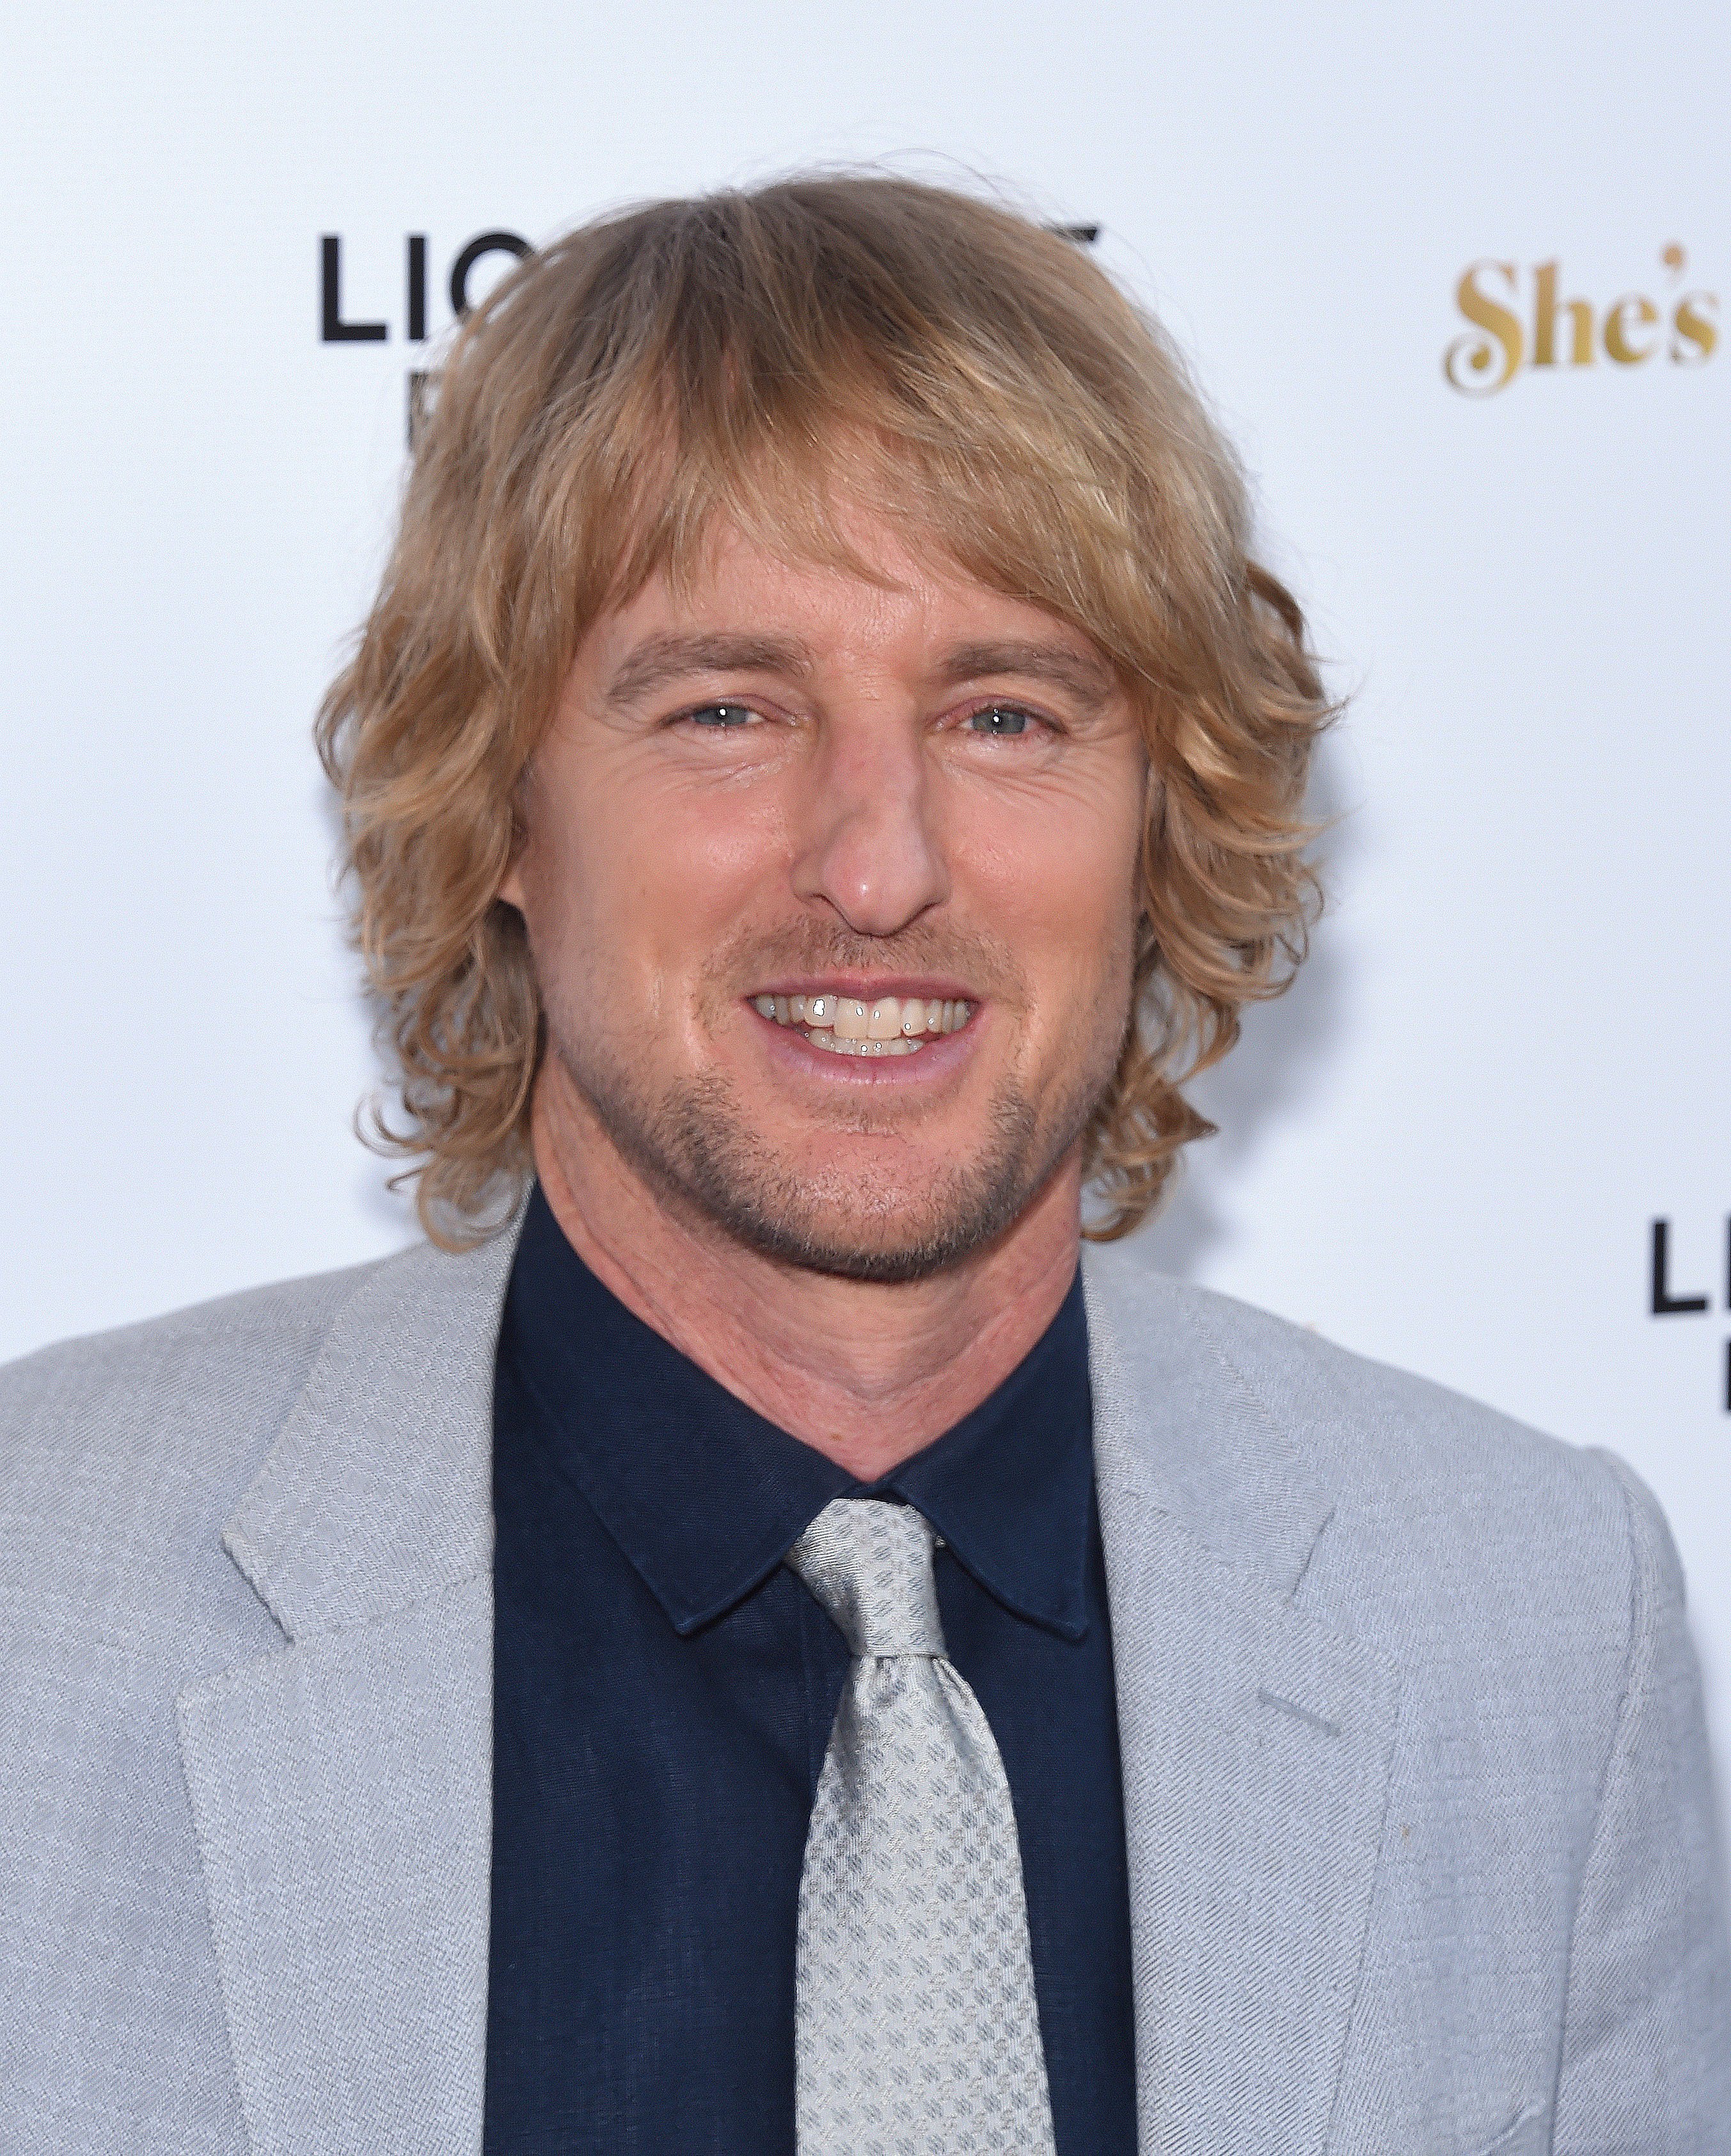 Owen Wilson pictured at the Premiere for "She's Funny That Way" at Harmony Gold on August 19, 2015 | Source: Getty Images